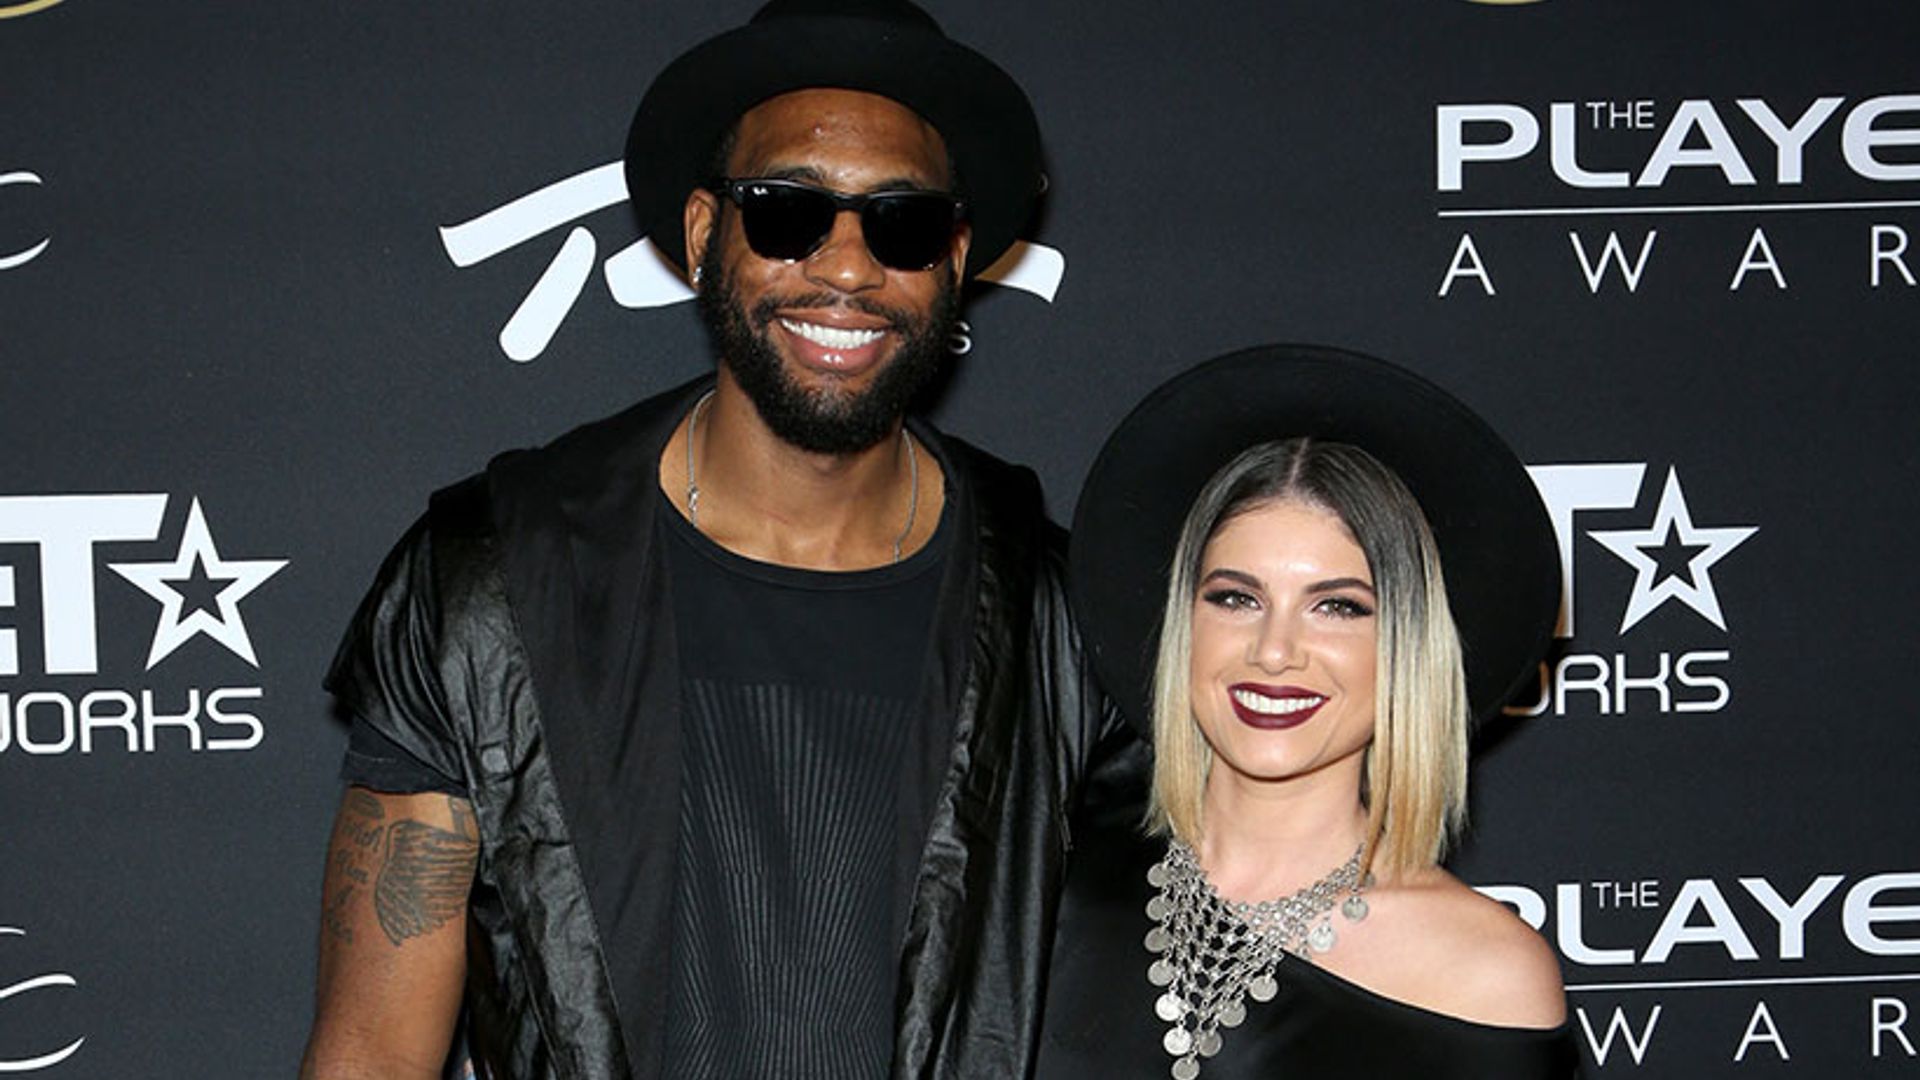 US basketball player and American Idol star die in horrific car accident